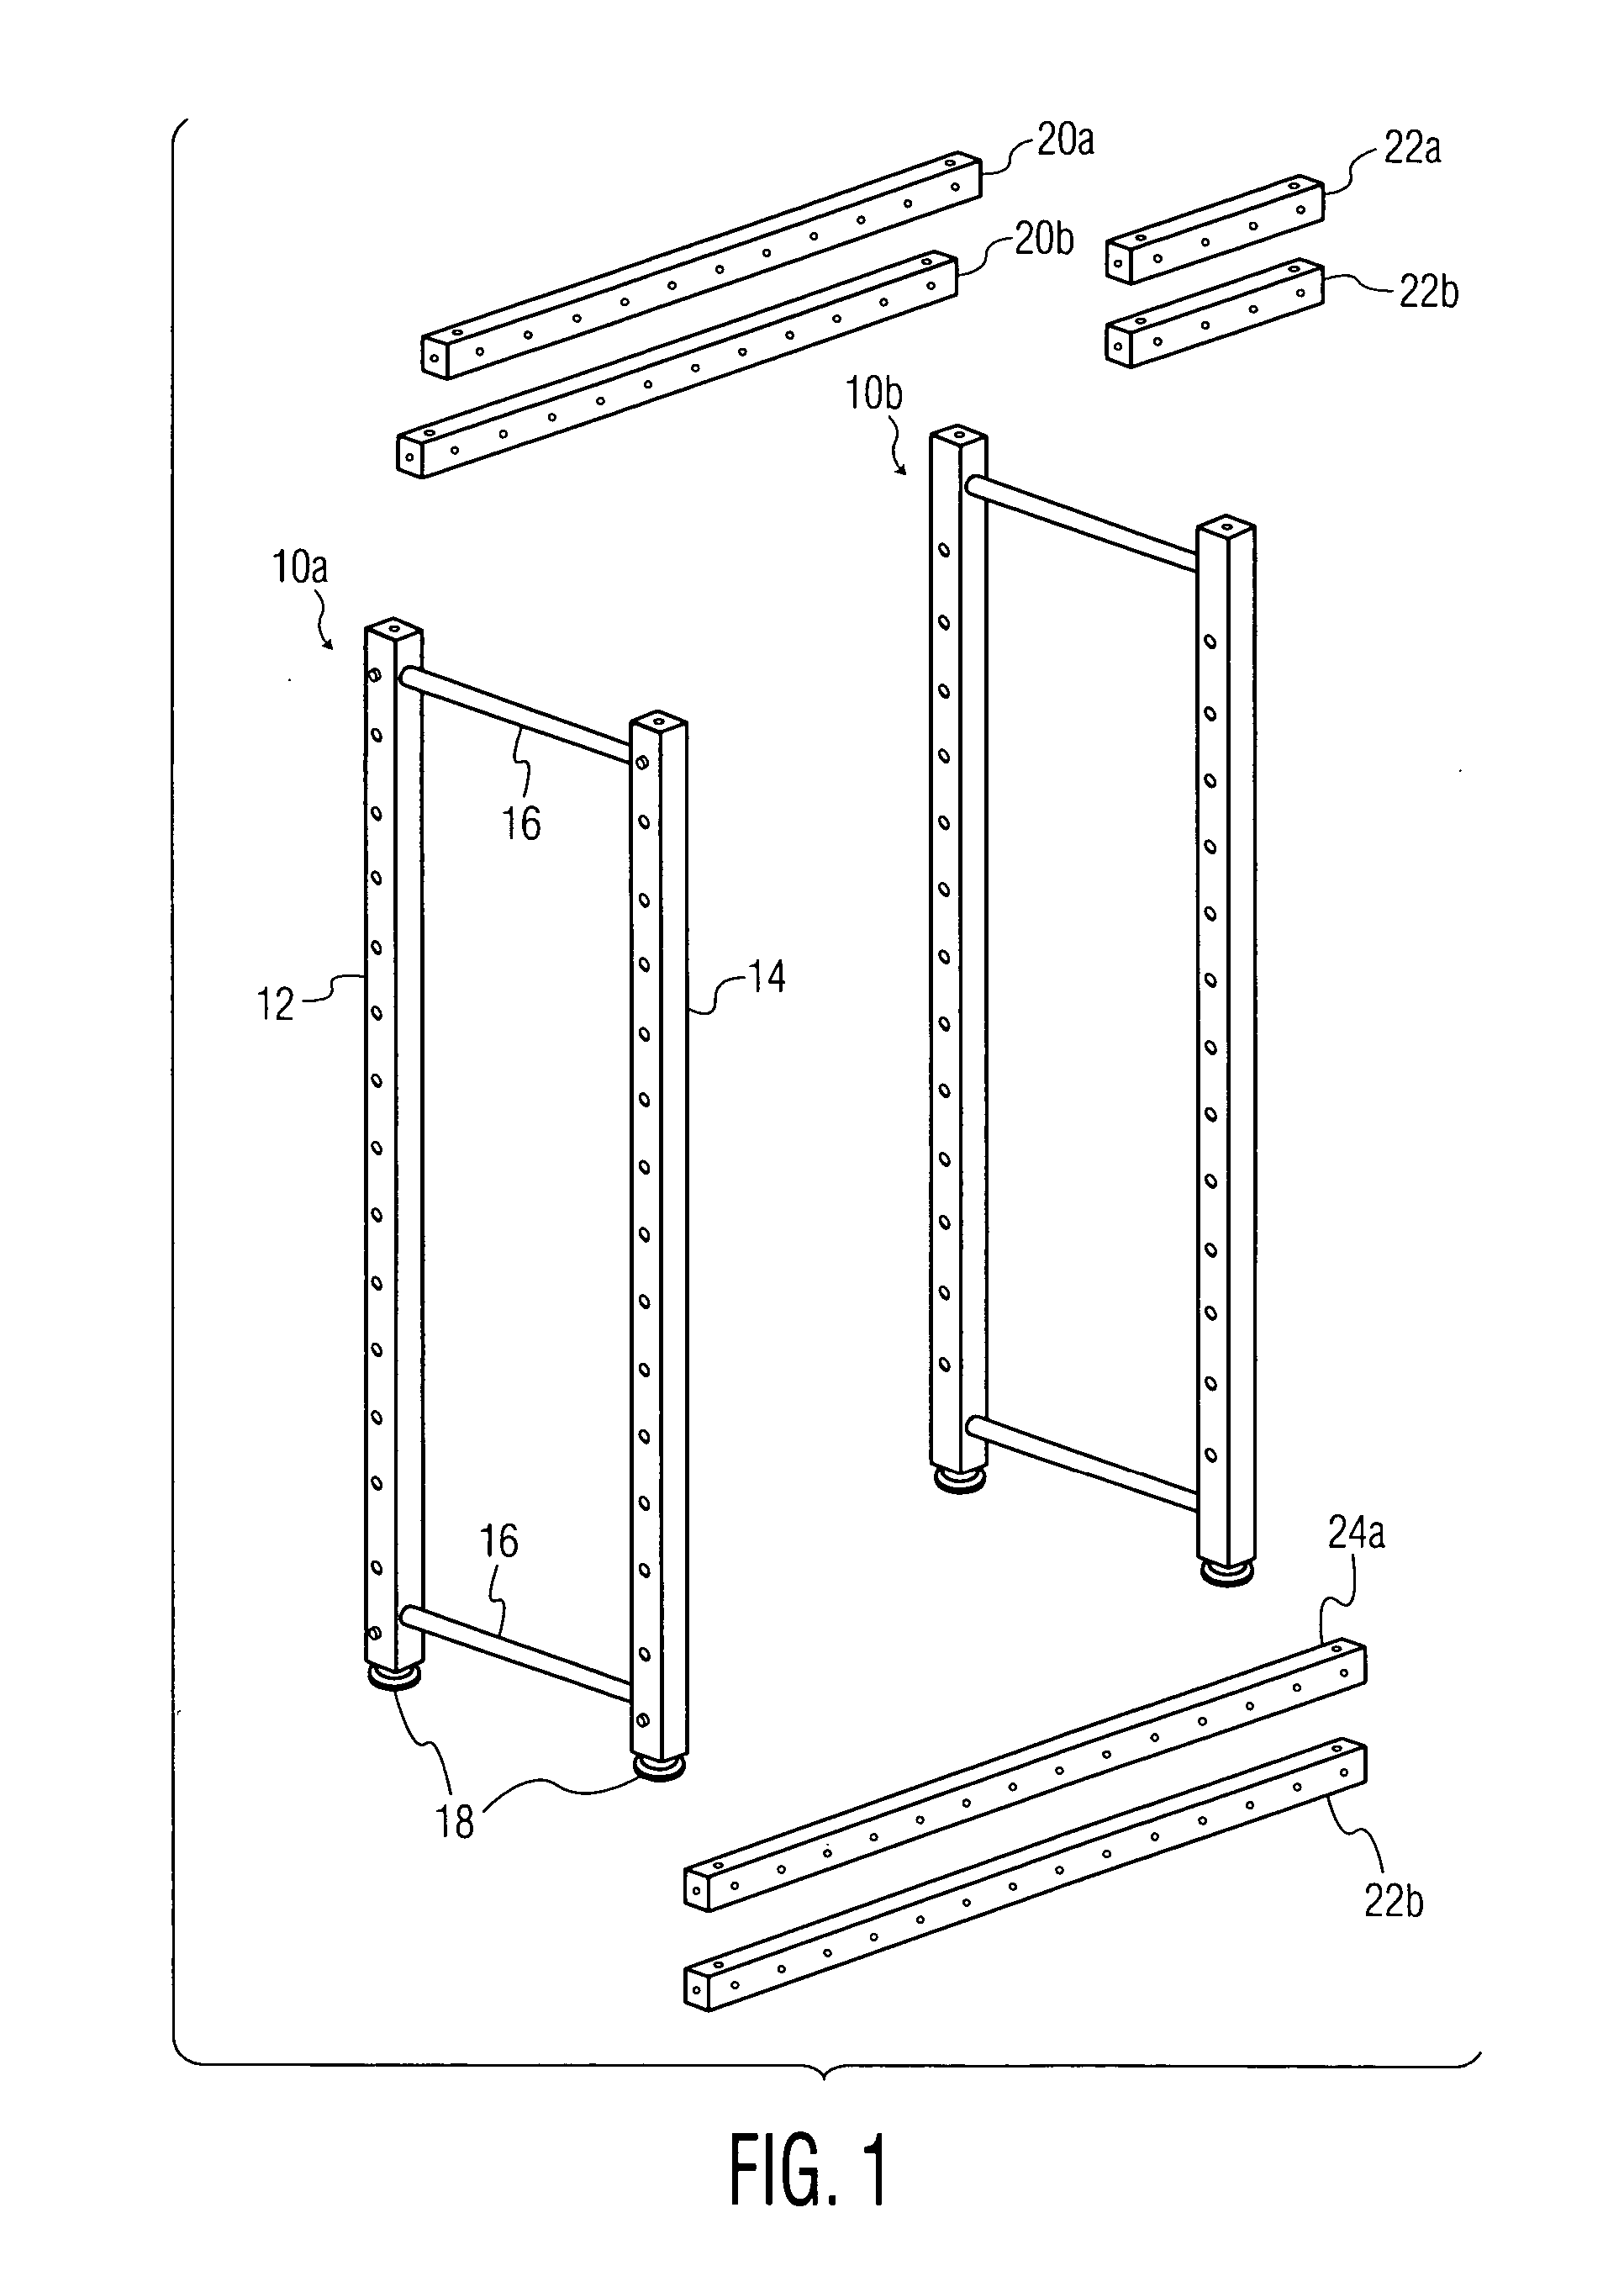 User-defined exercise apparatus